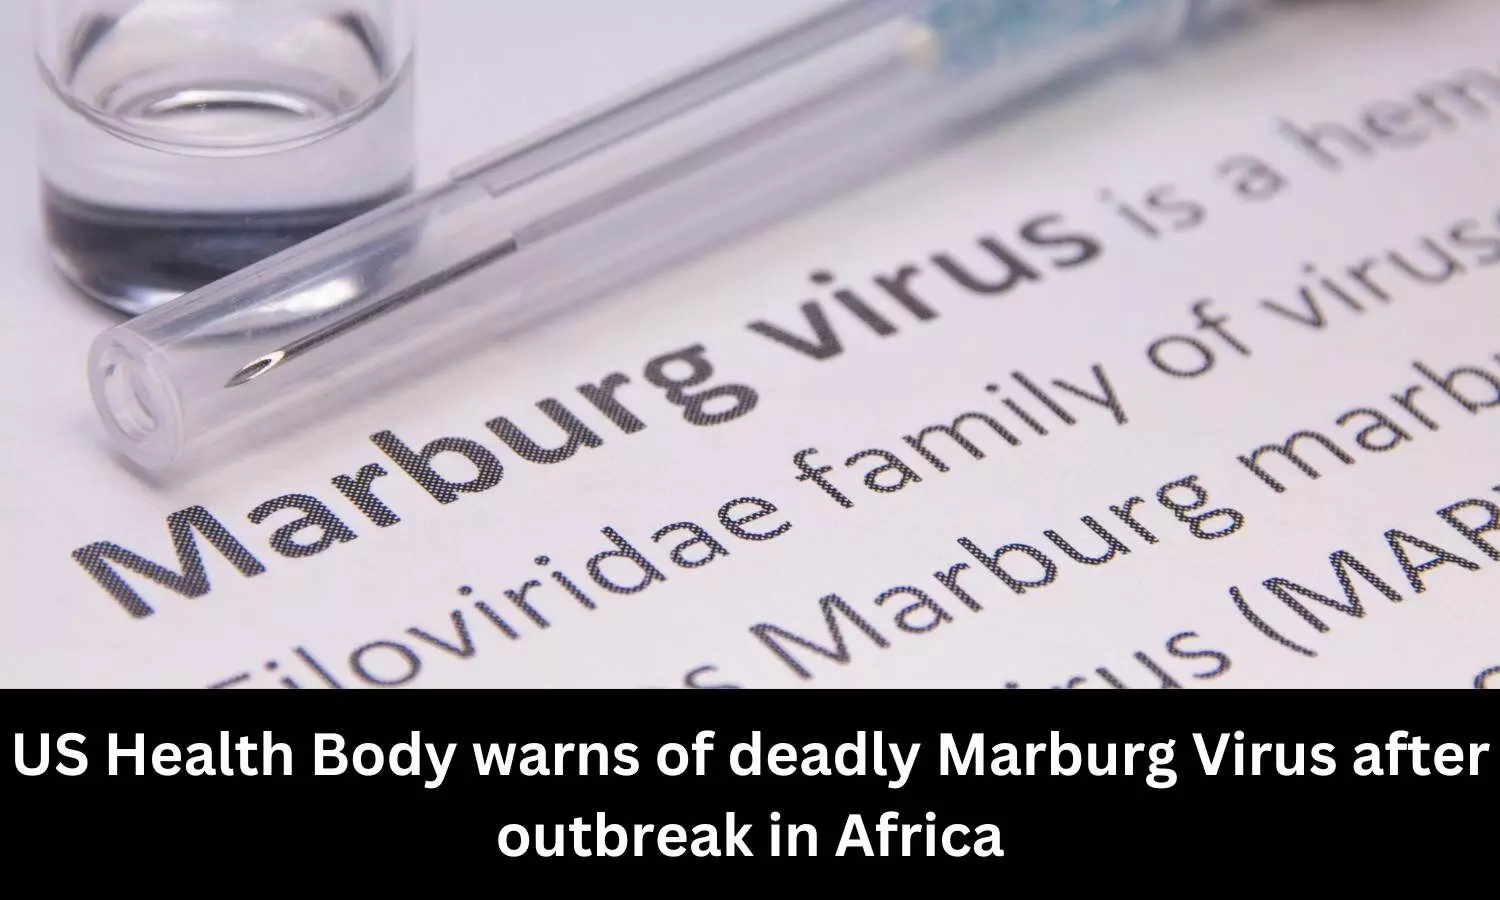 US Health Body warns of deadly Marburg Virus after outbreak in Africa